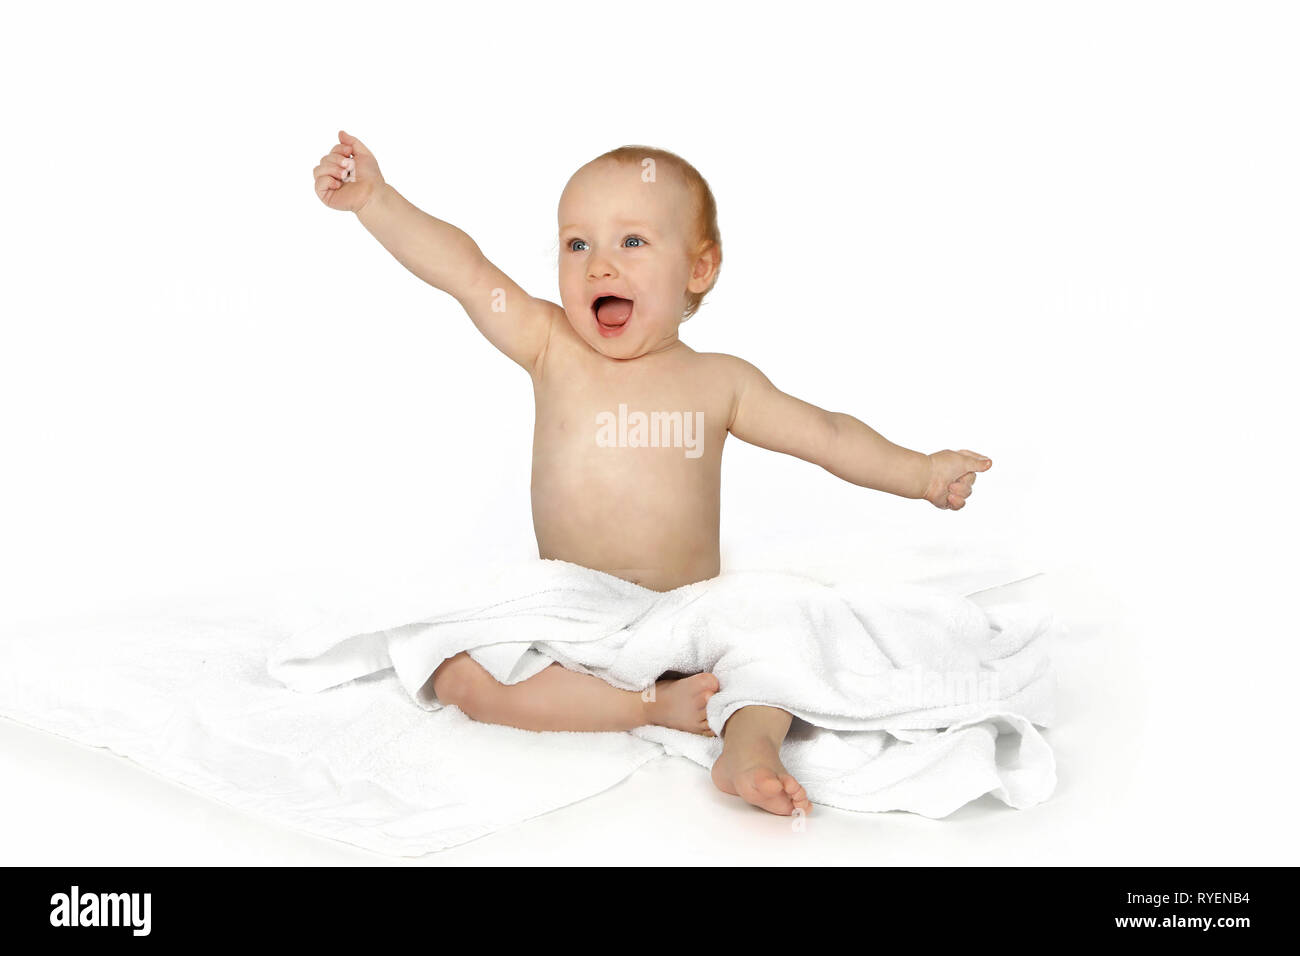 Happy infant in powerful pose Stock Photo